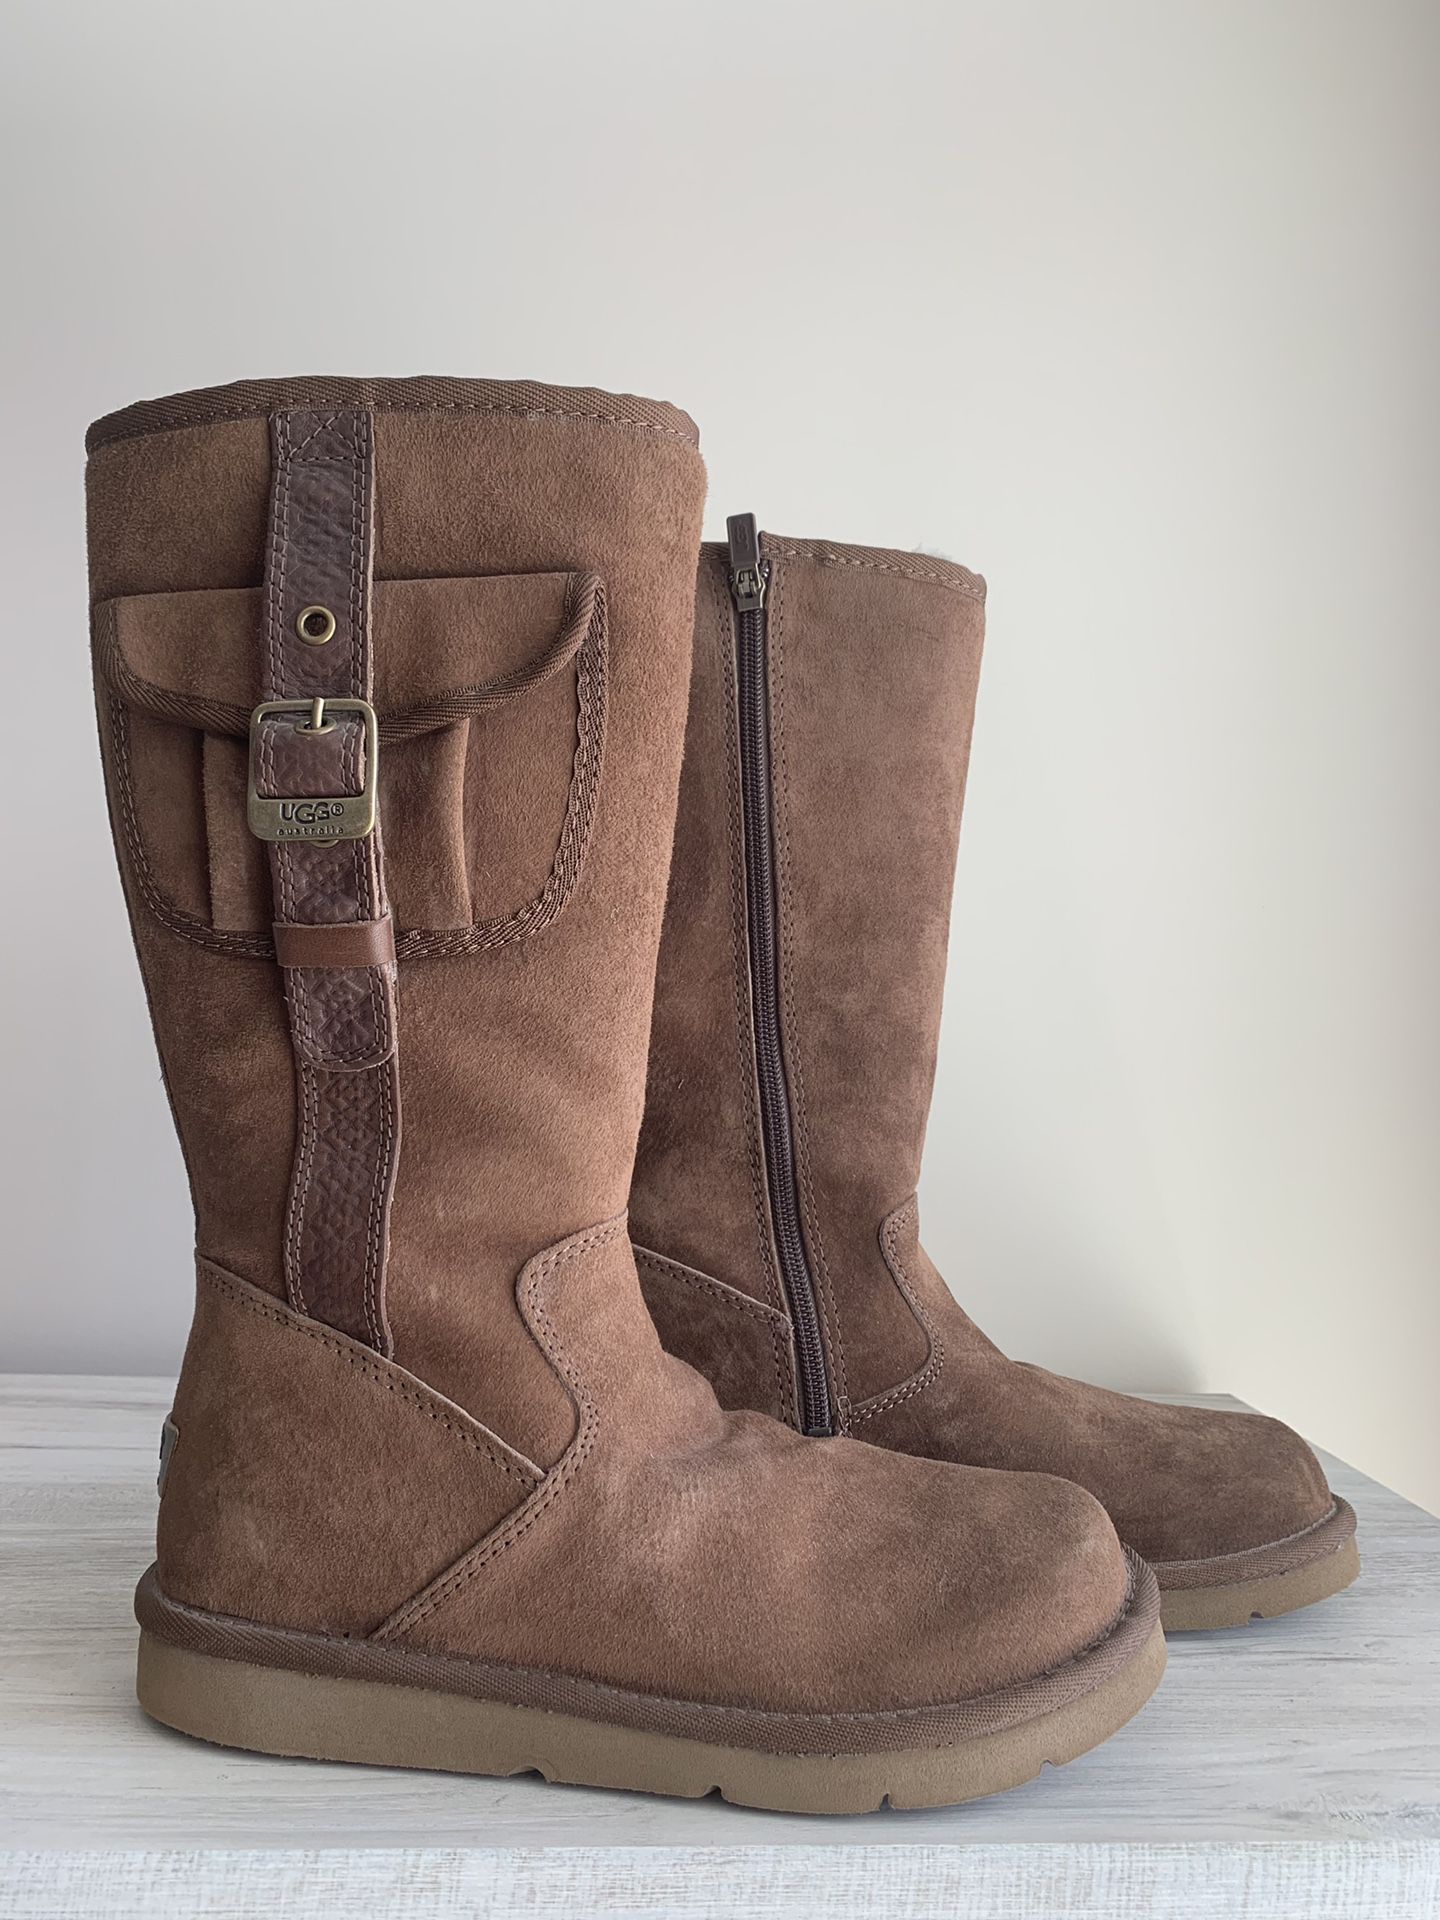 Brand New UGG Cargo Tall Boots